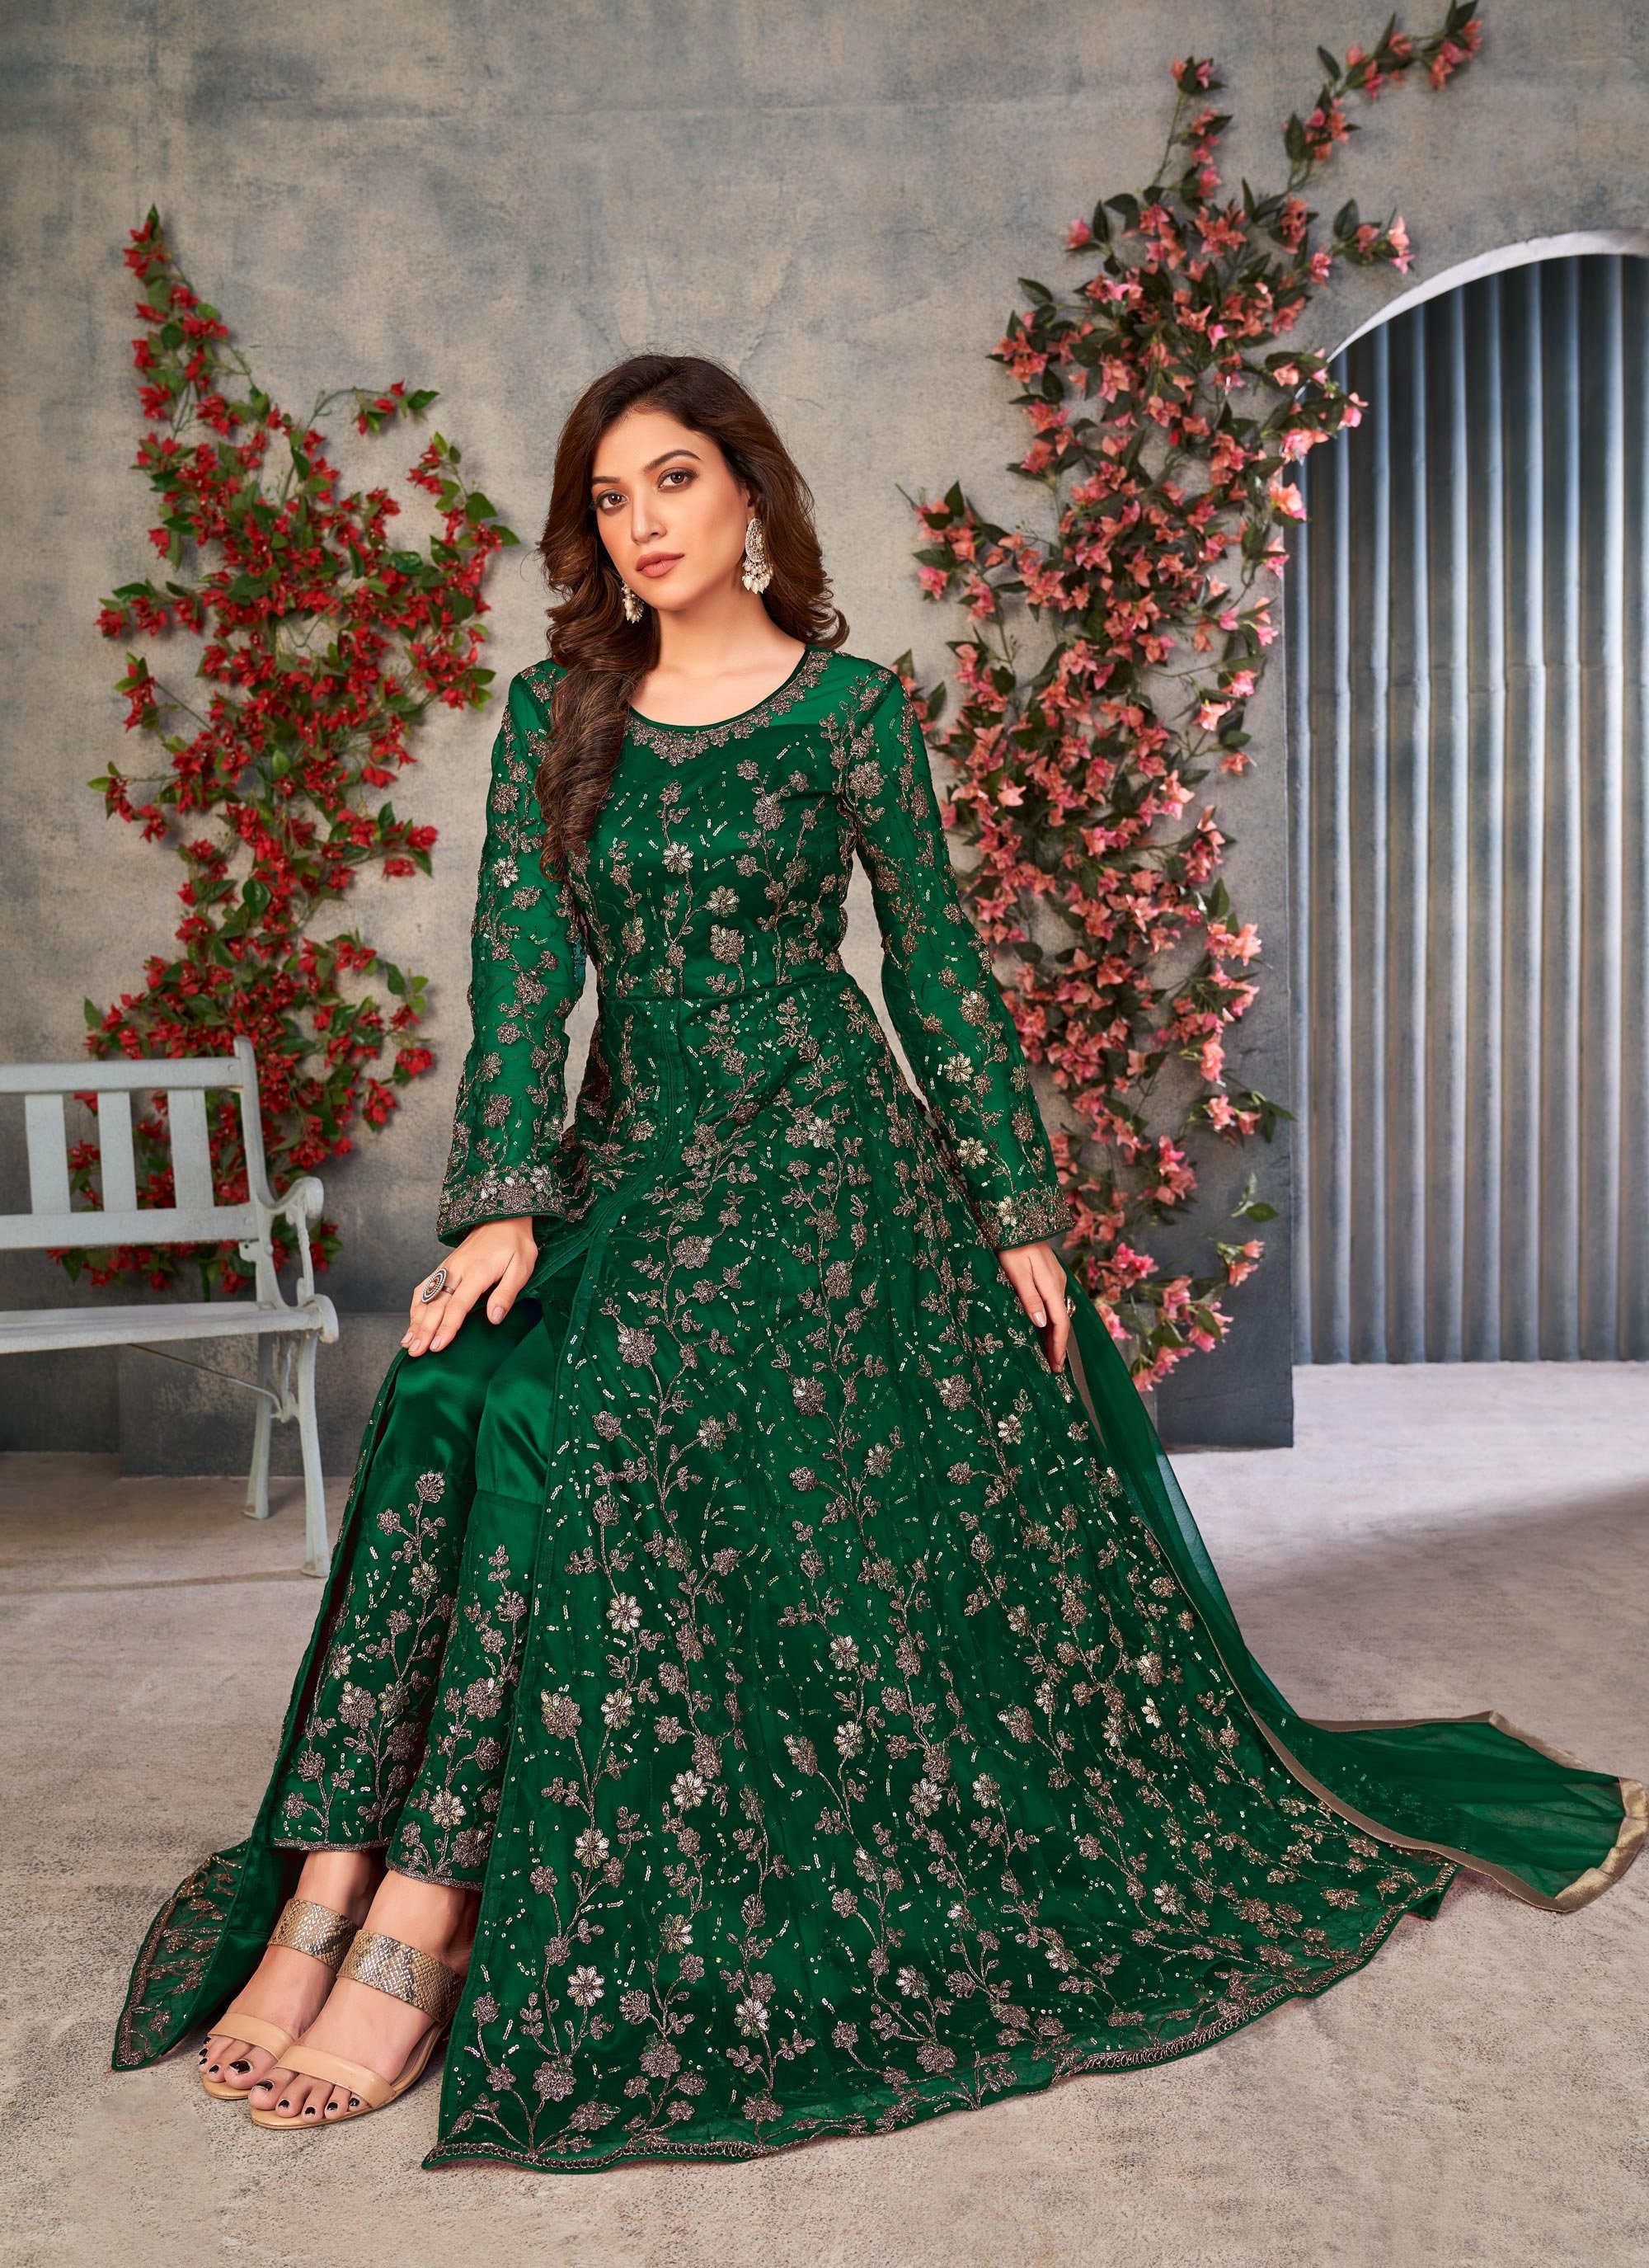 Burgundy Moroccan Caftan Pakistani Formal Dresses With Embroidery A Line,  Long Sleeves, Floor Length, Vintage Velour Evening Gown From Huhu6, $135.74  | DHgate.Com